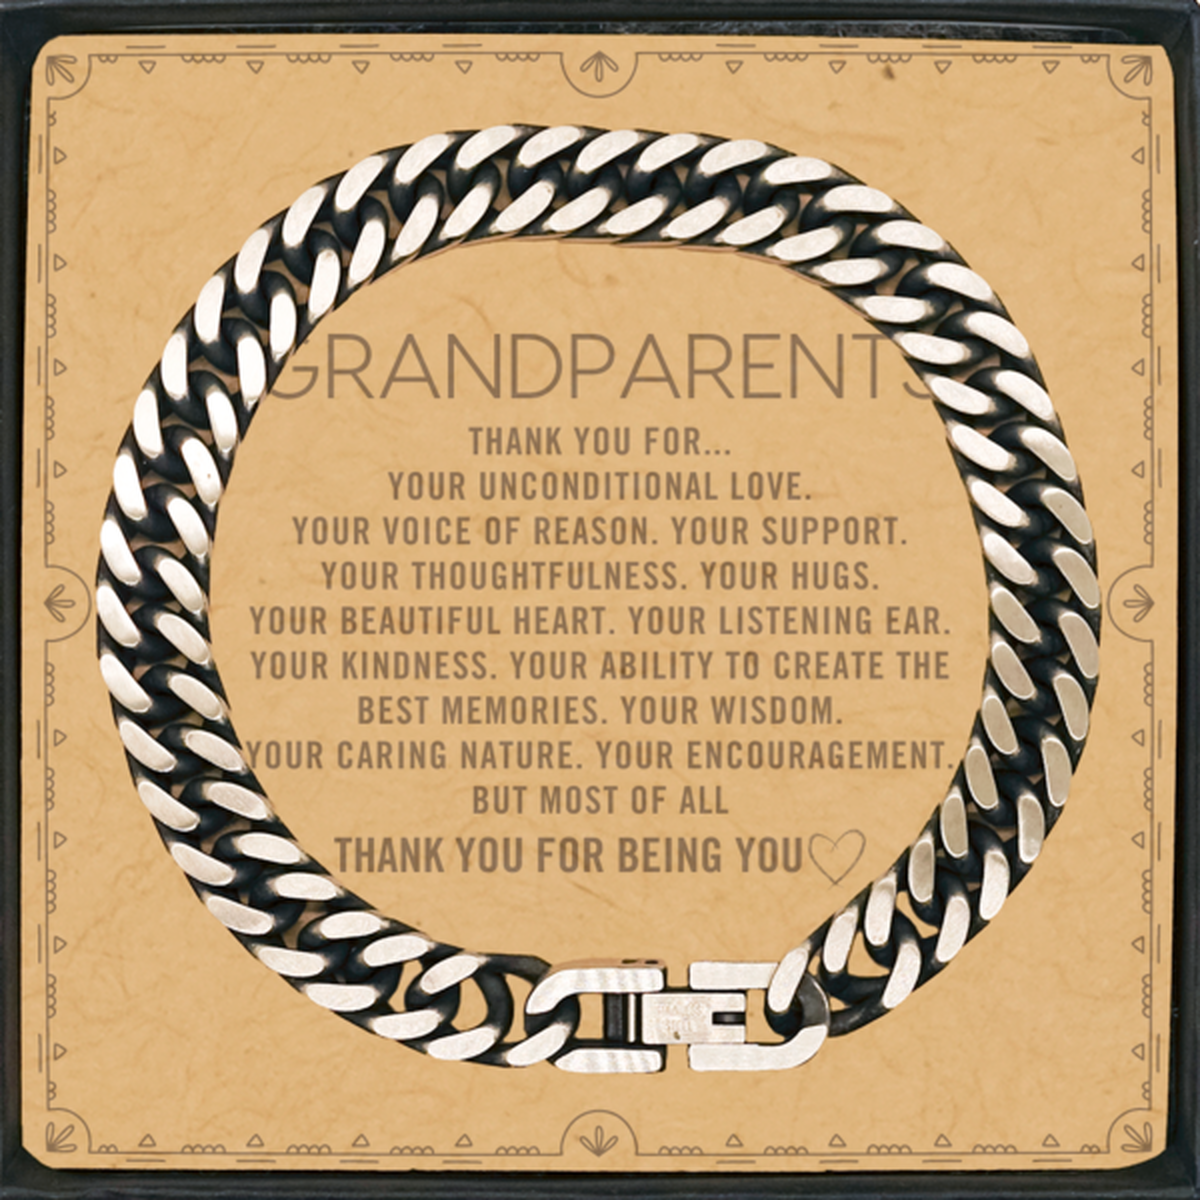 Grandparents Cuban Link Chain Bracelet Custom, Message Card Gifts For Grandparents Christmas Graduation Birthday Gifts for Men Women Grandparents Thank you for Your unconditional love